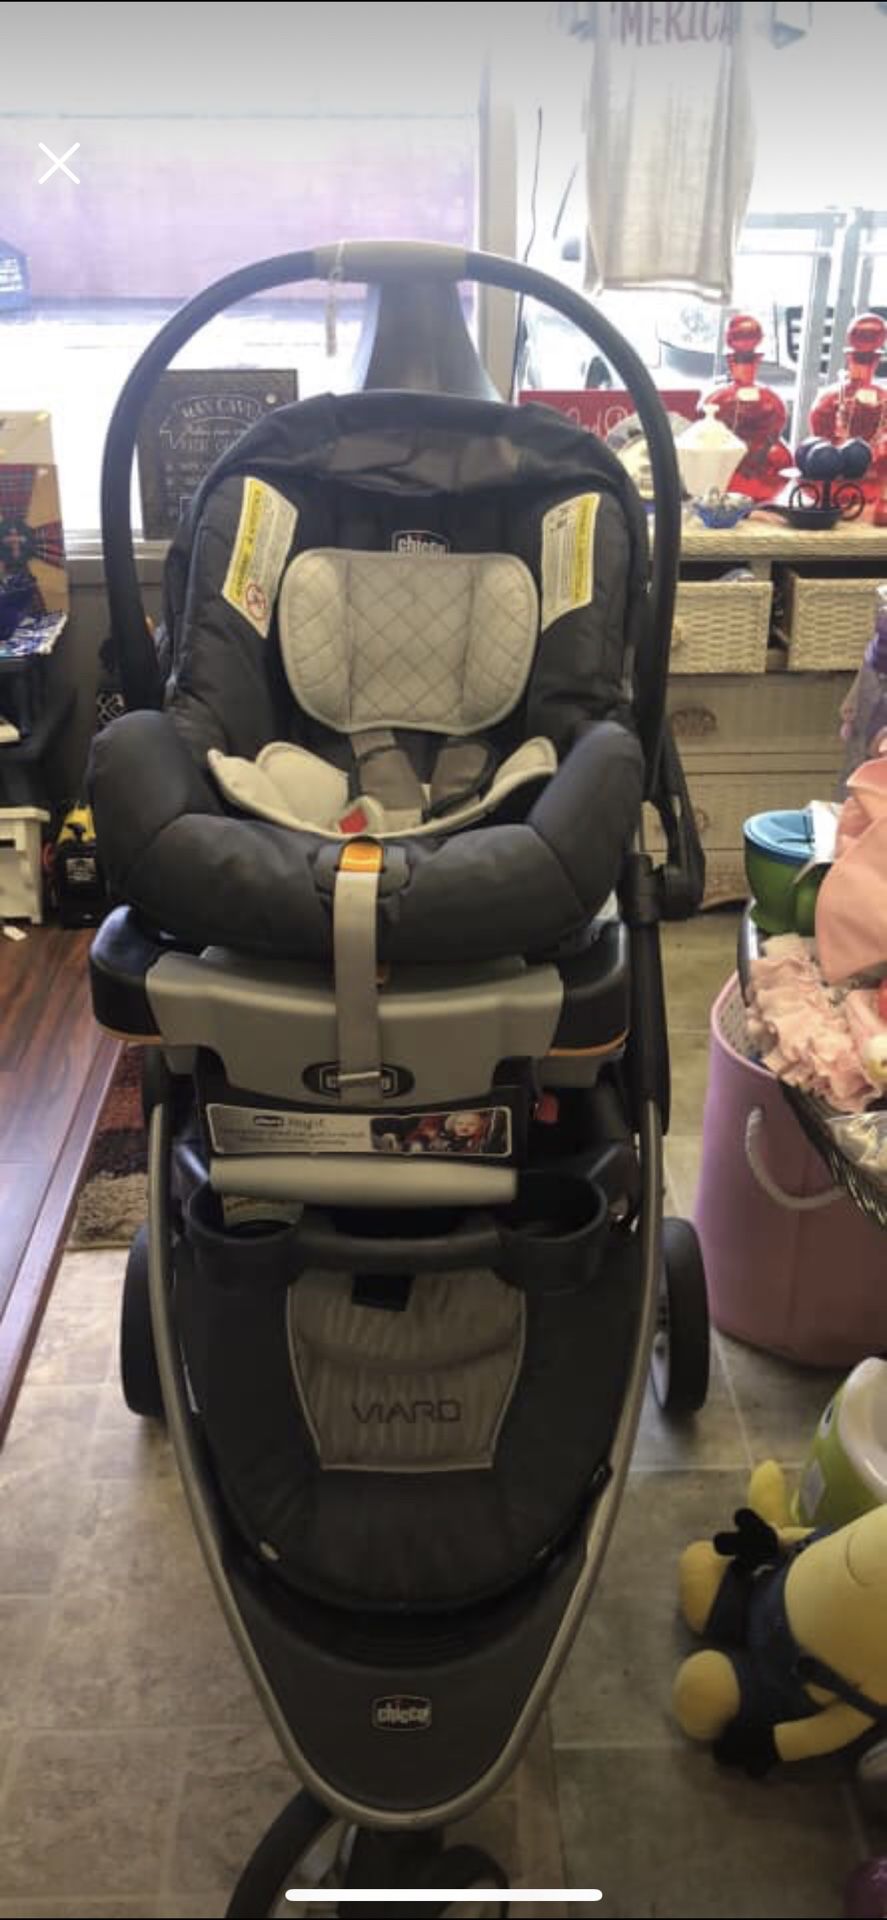 Chicco stroller/car seat combo and Chicco all-in-one playard